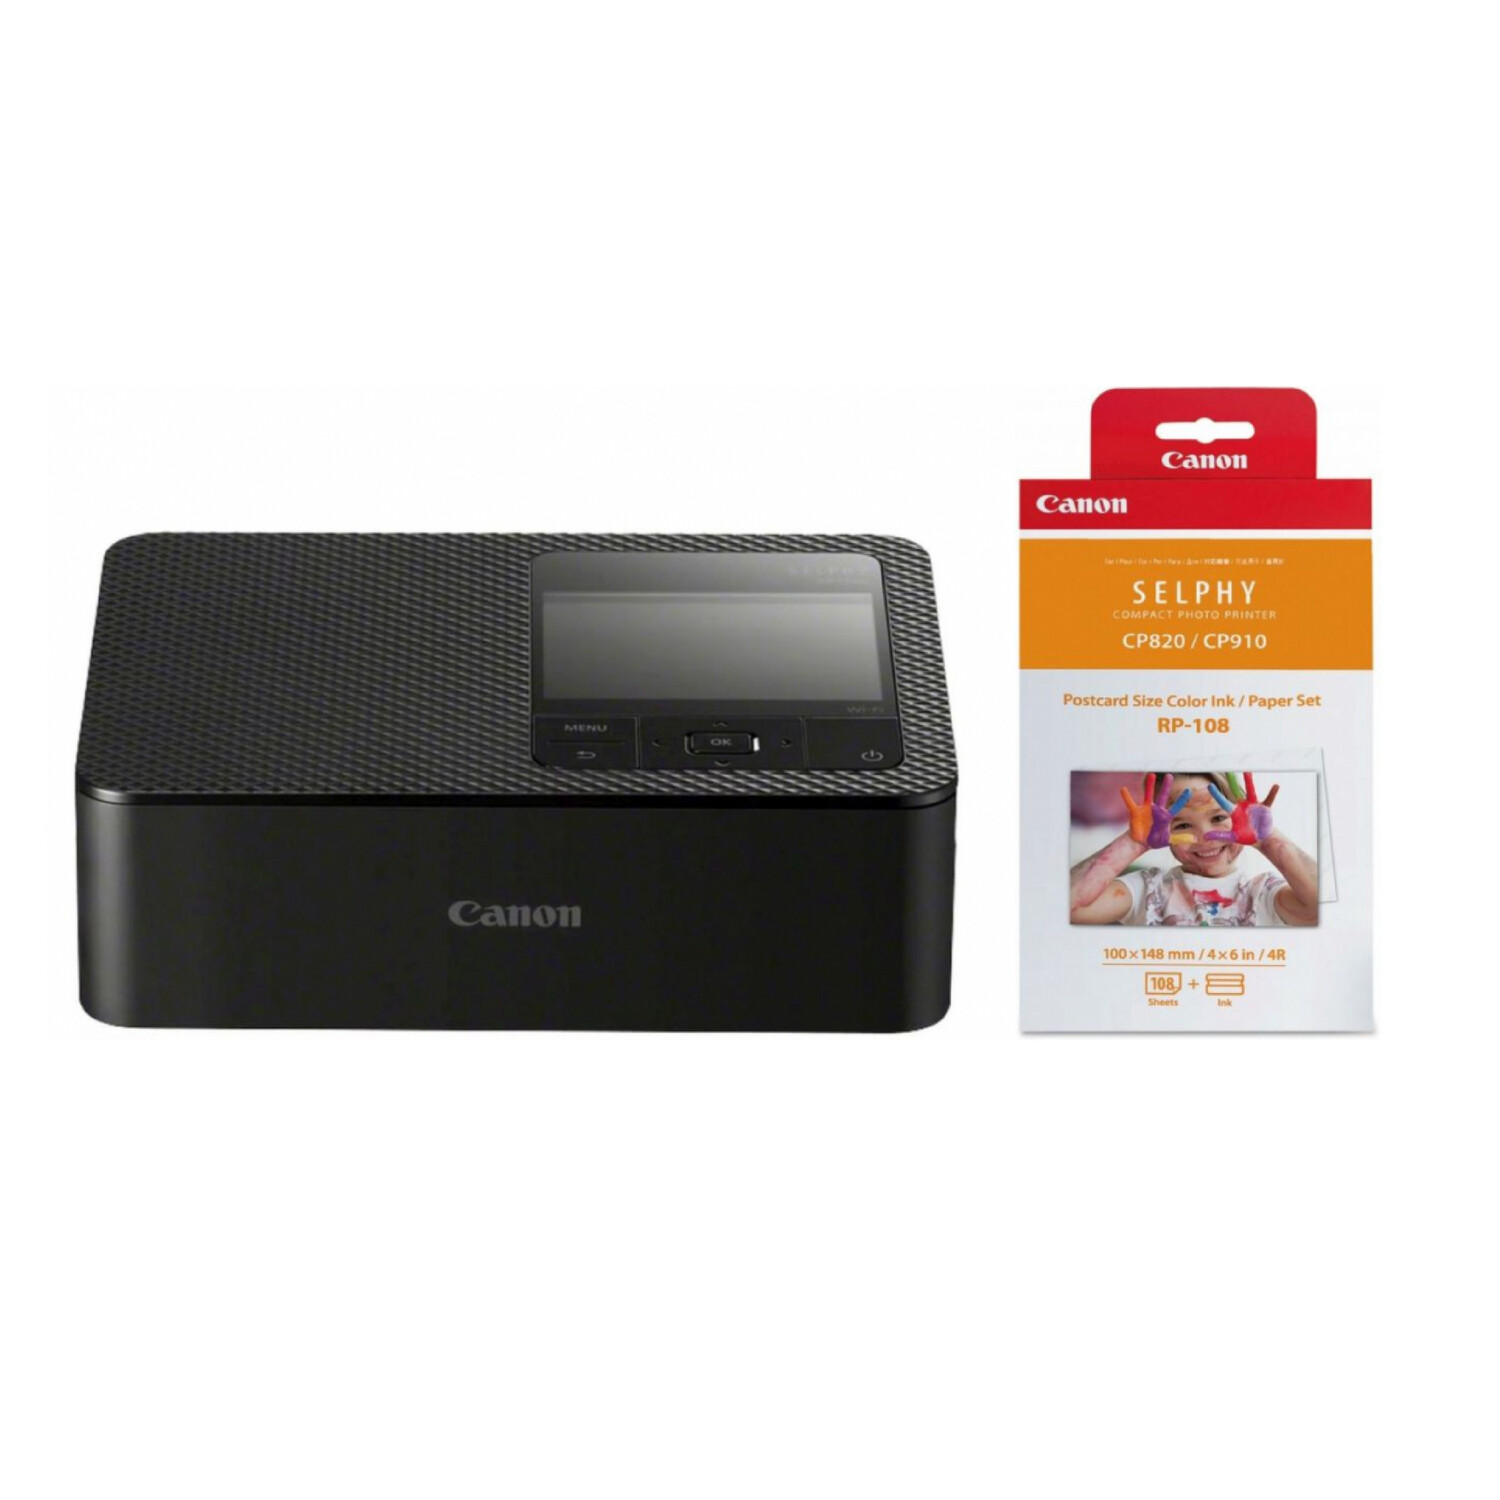 Canon SELPHY CP1500 Photo Printer Bundle with RP-108 Selphy Paper (108 sheets) with ink, Color: Black